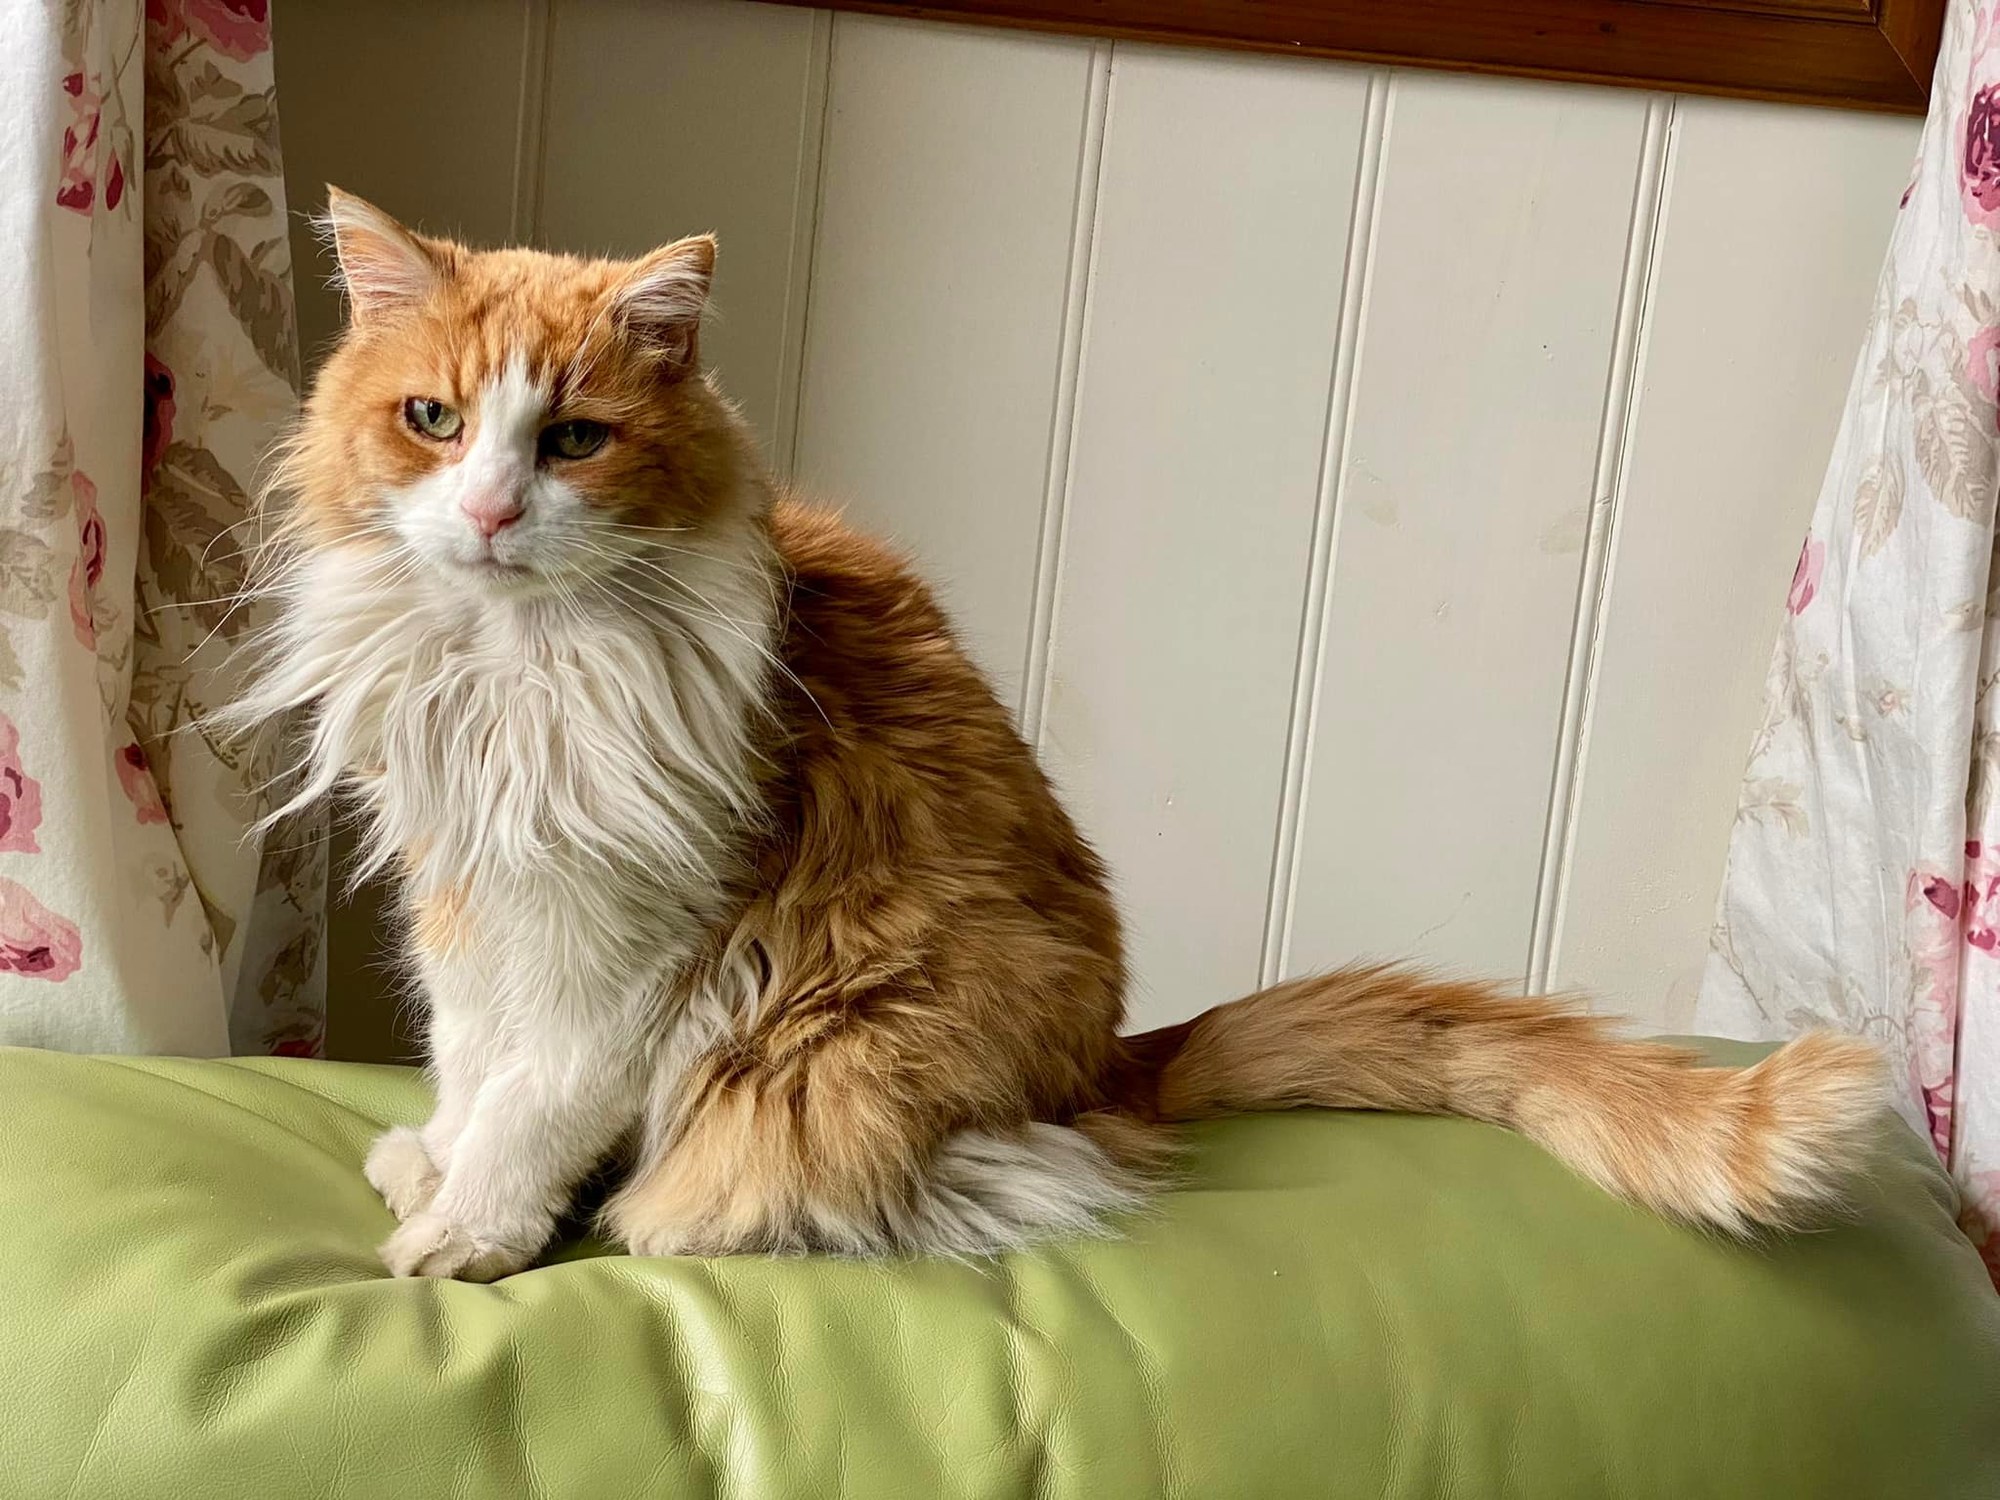 A senior ginger cat stands on a lounge